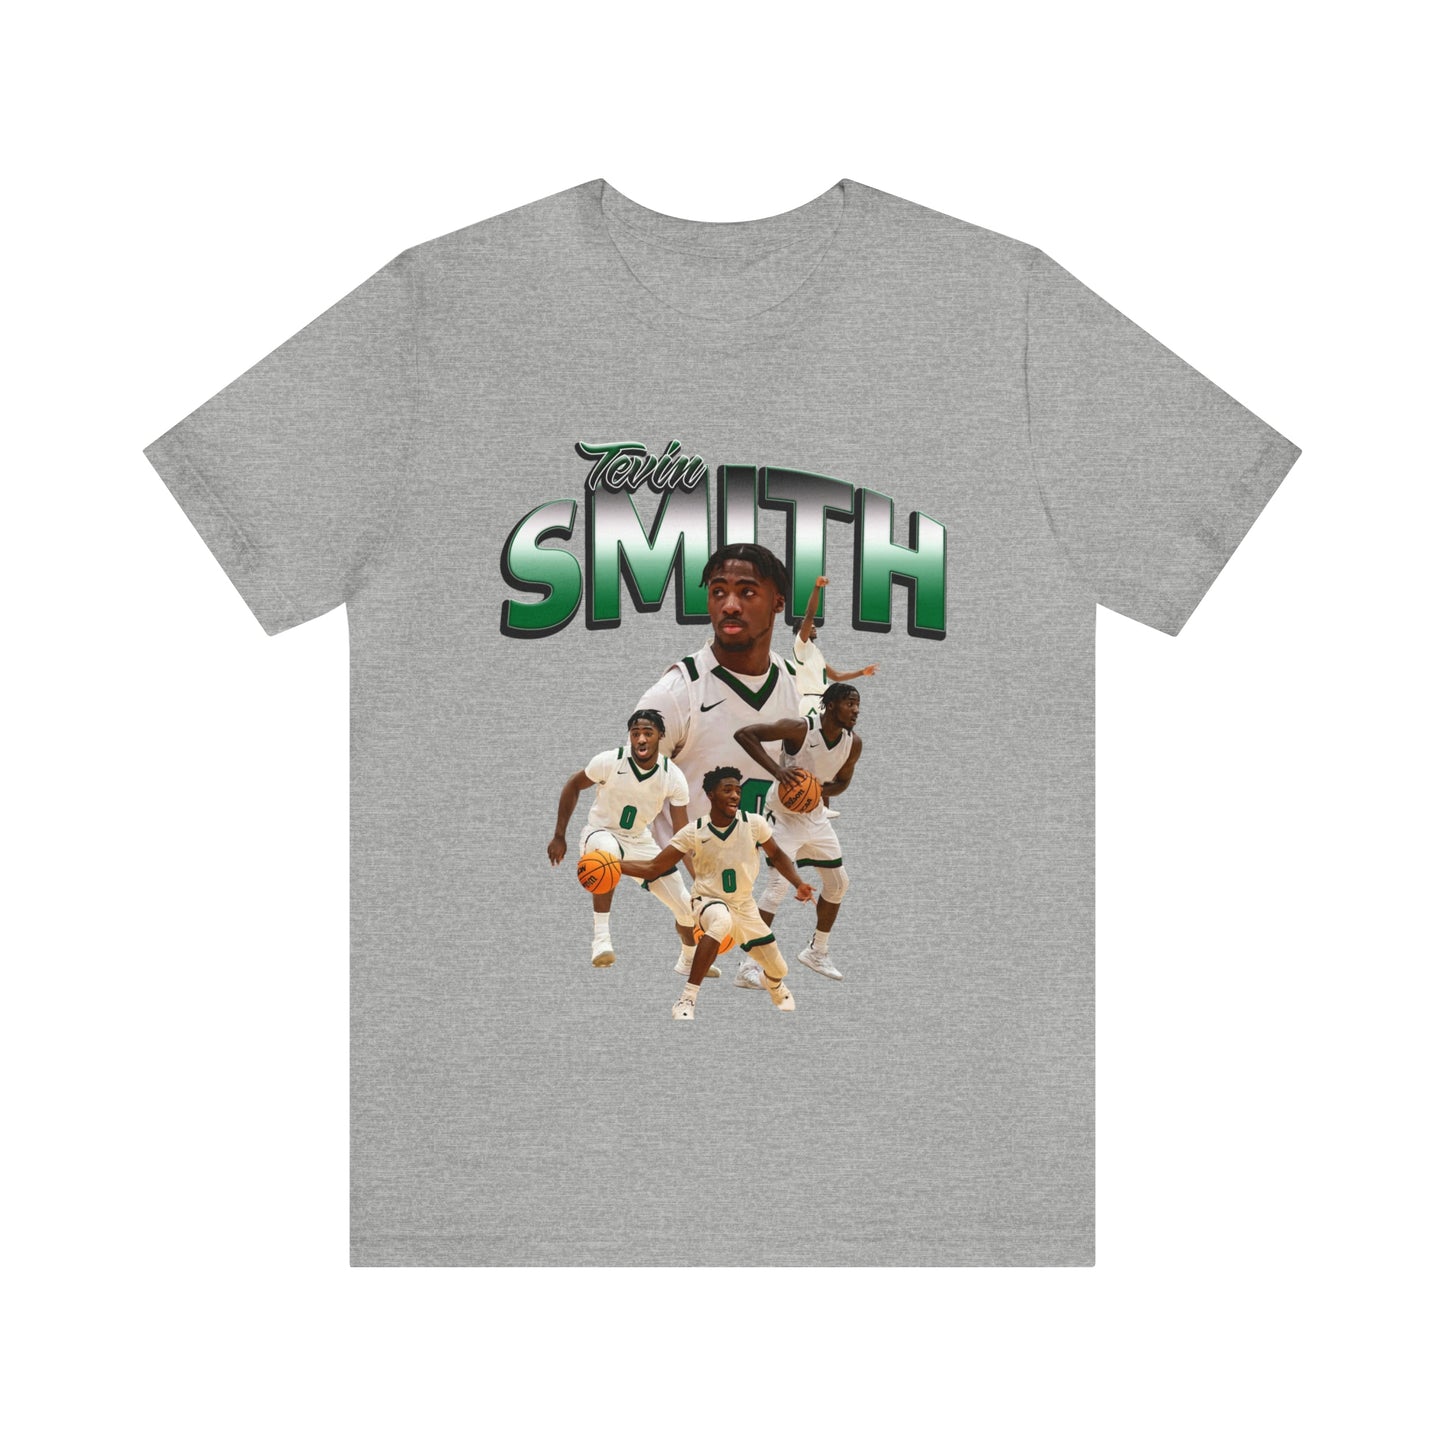 Tevin Smith: GameDay Tee